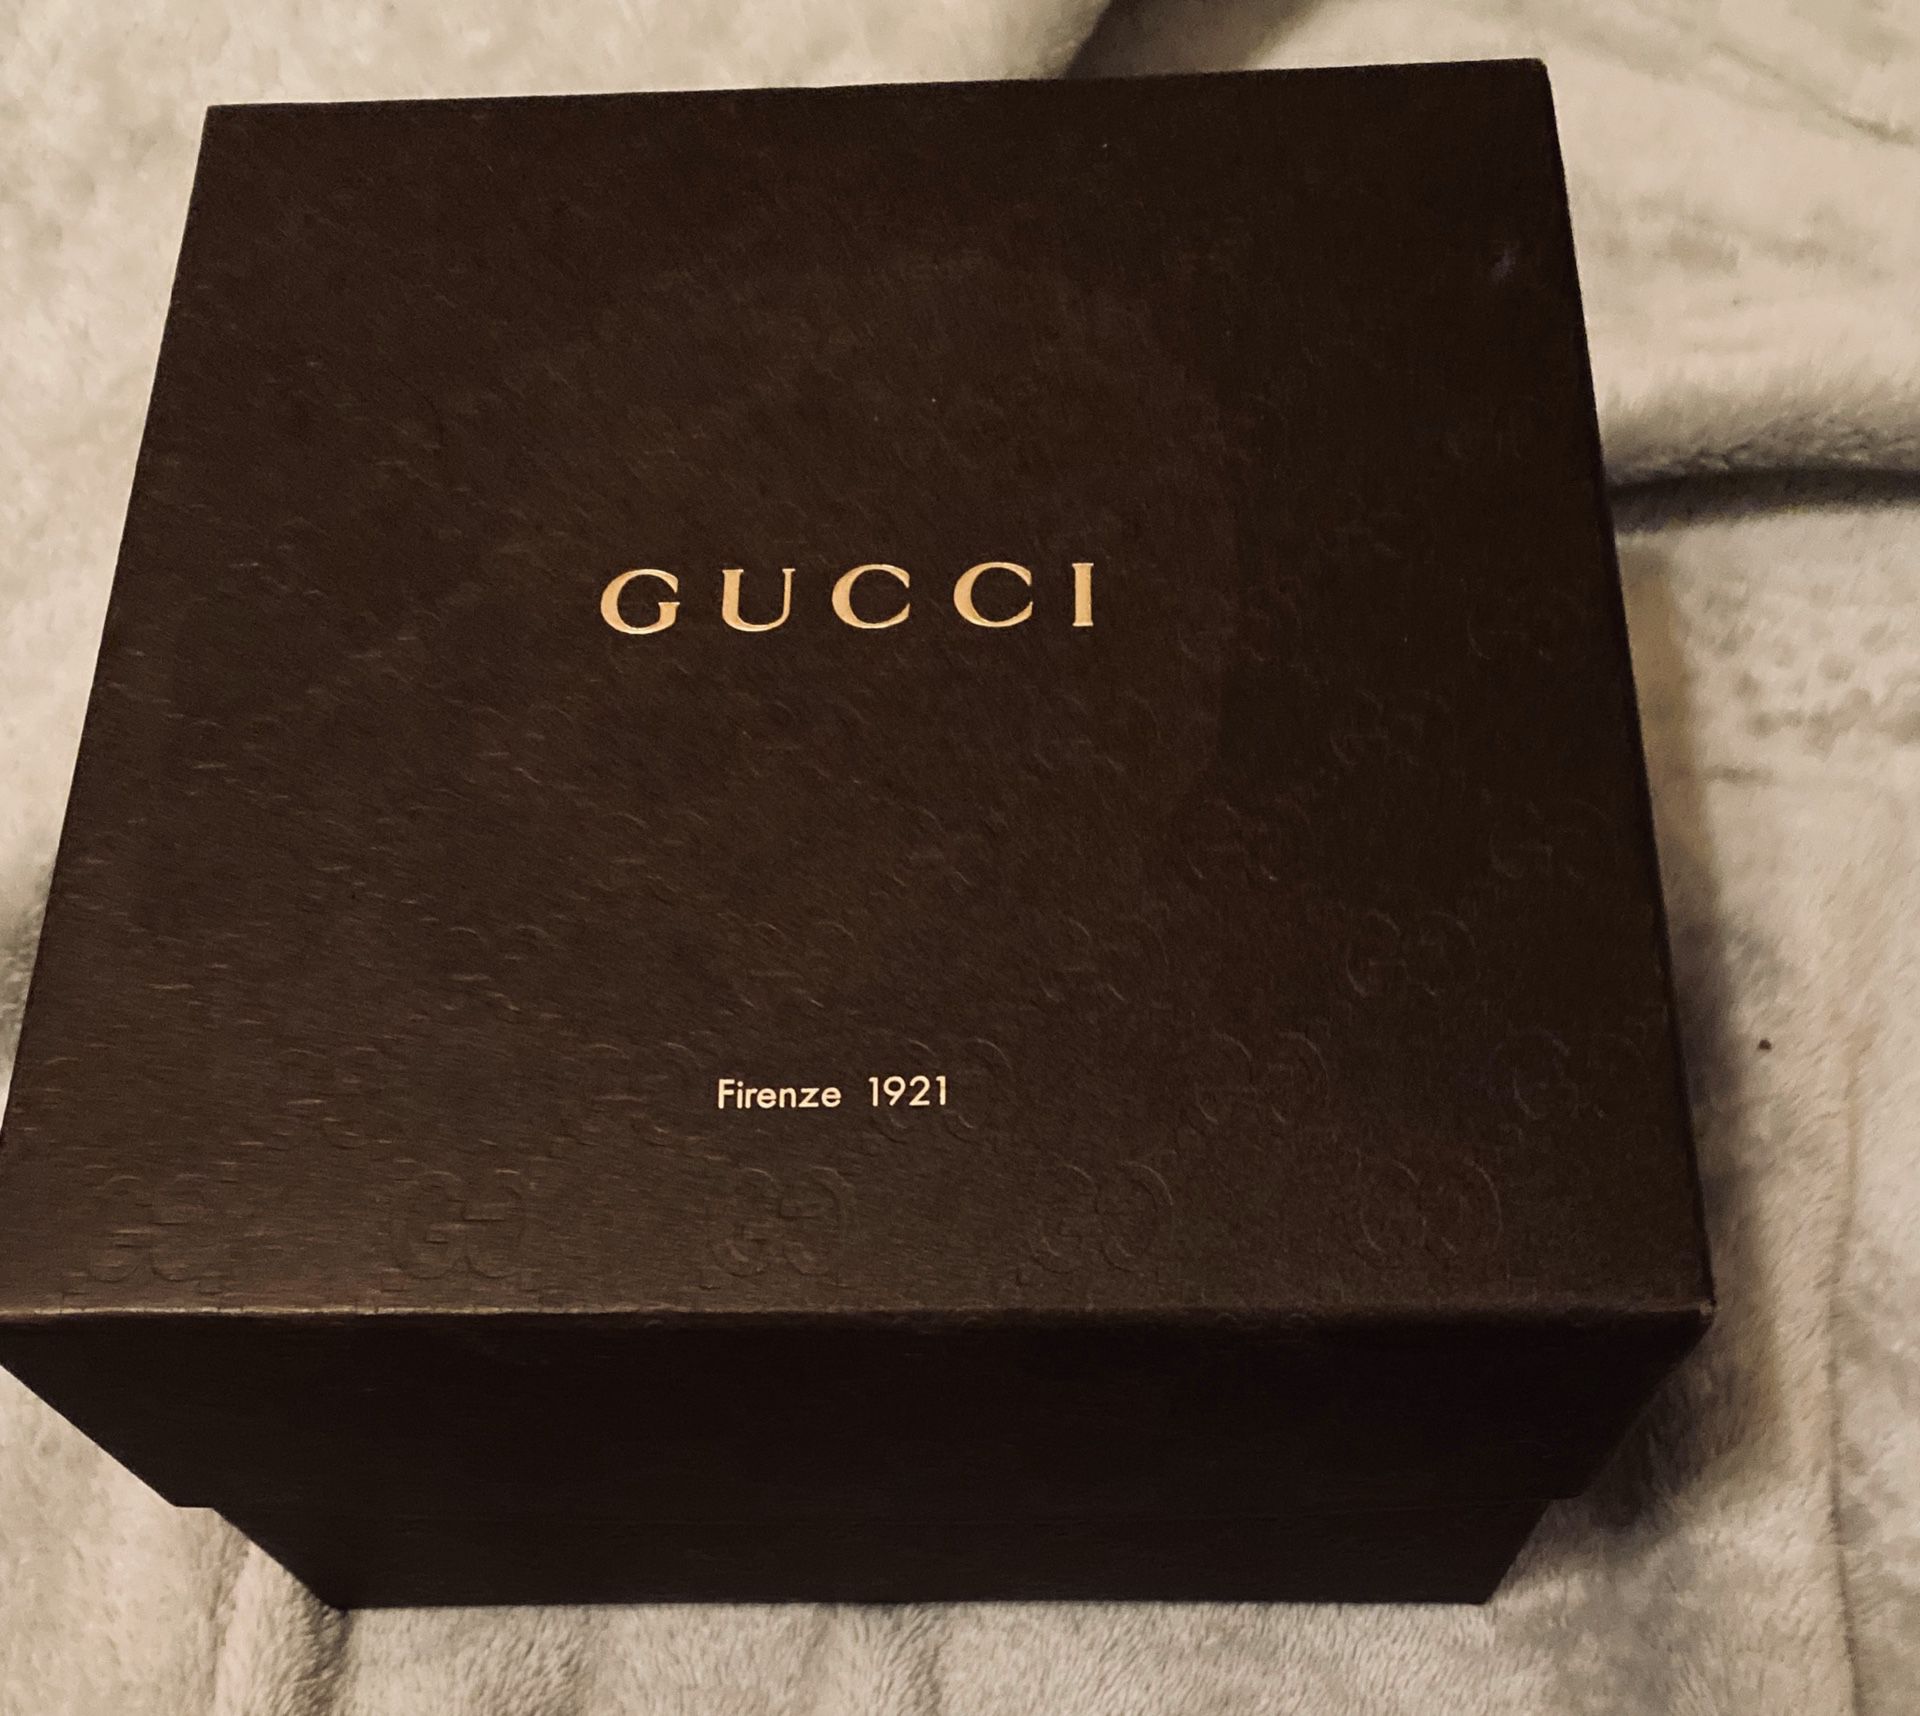 Gucci Box 7”x7.5” 5” deep to fit belt, wallet, hat or scarf for gift